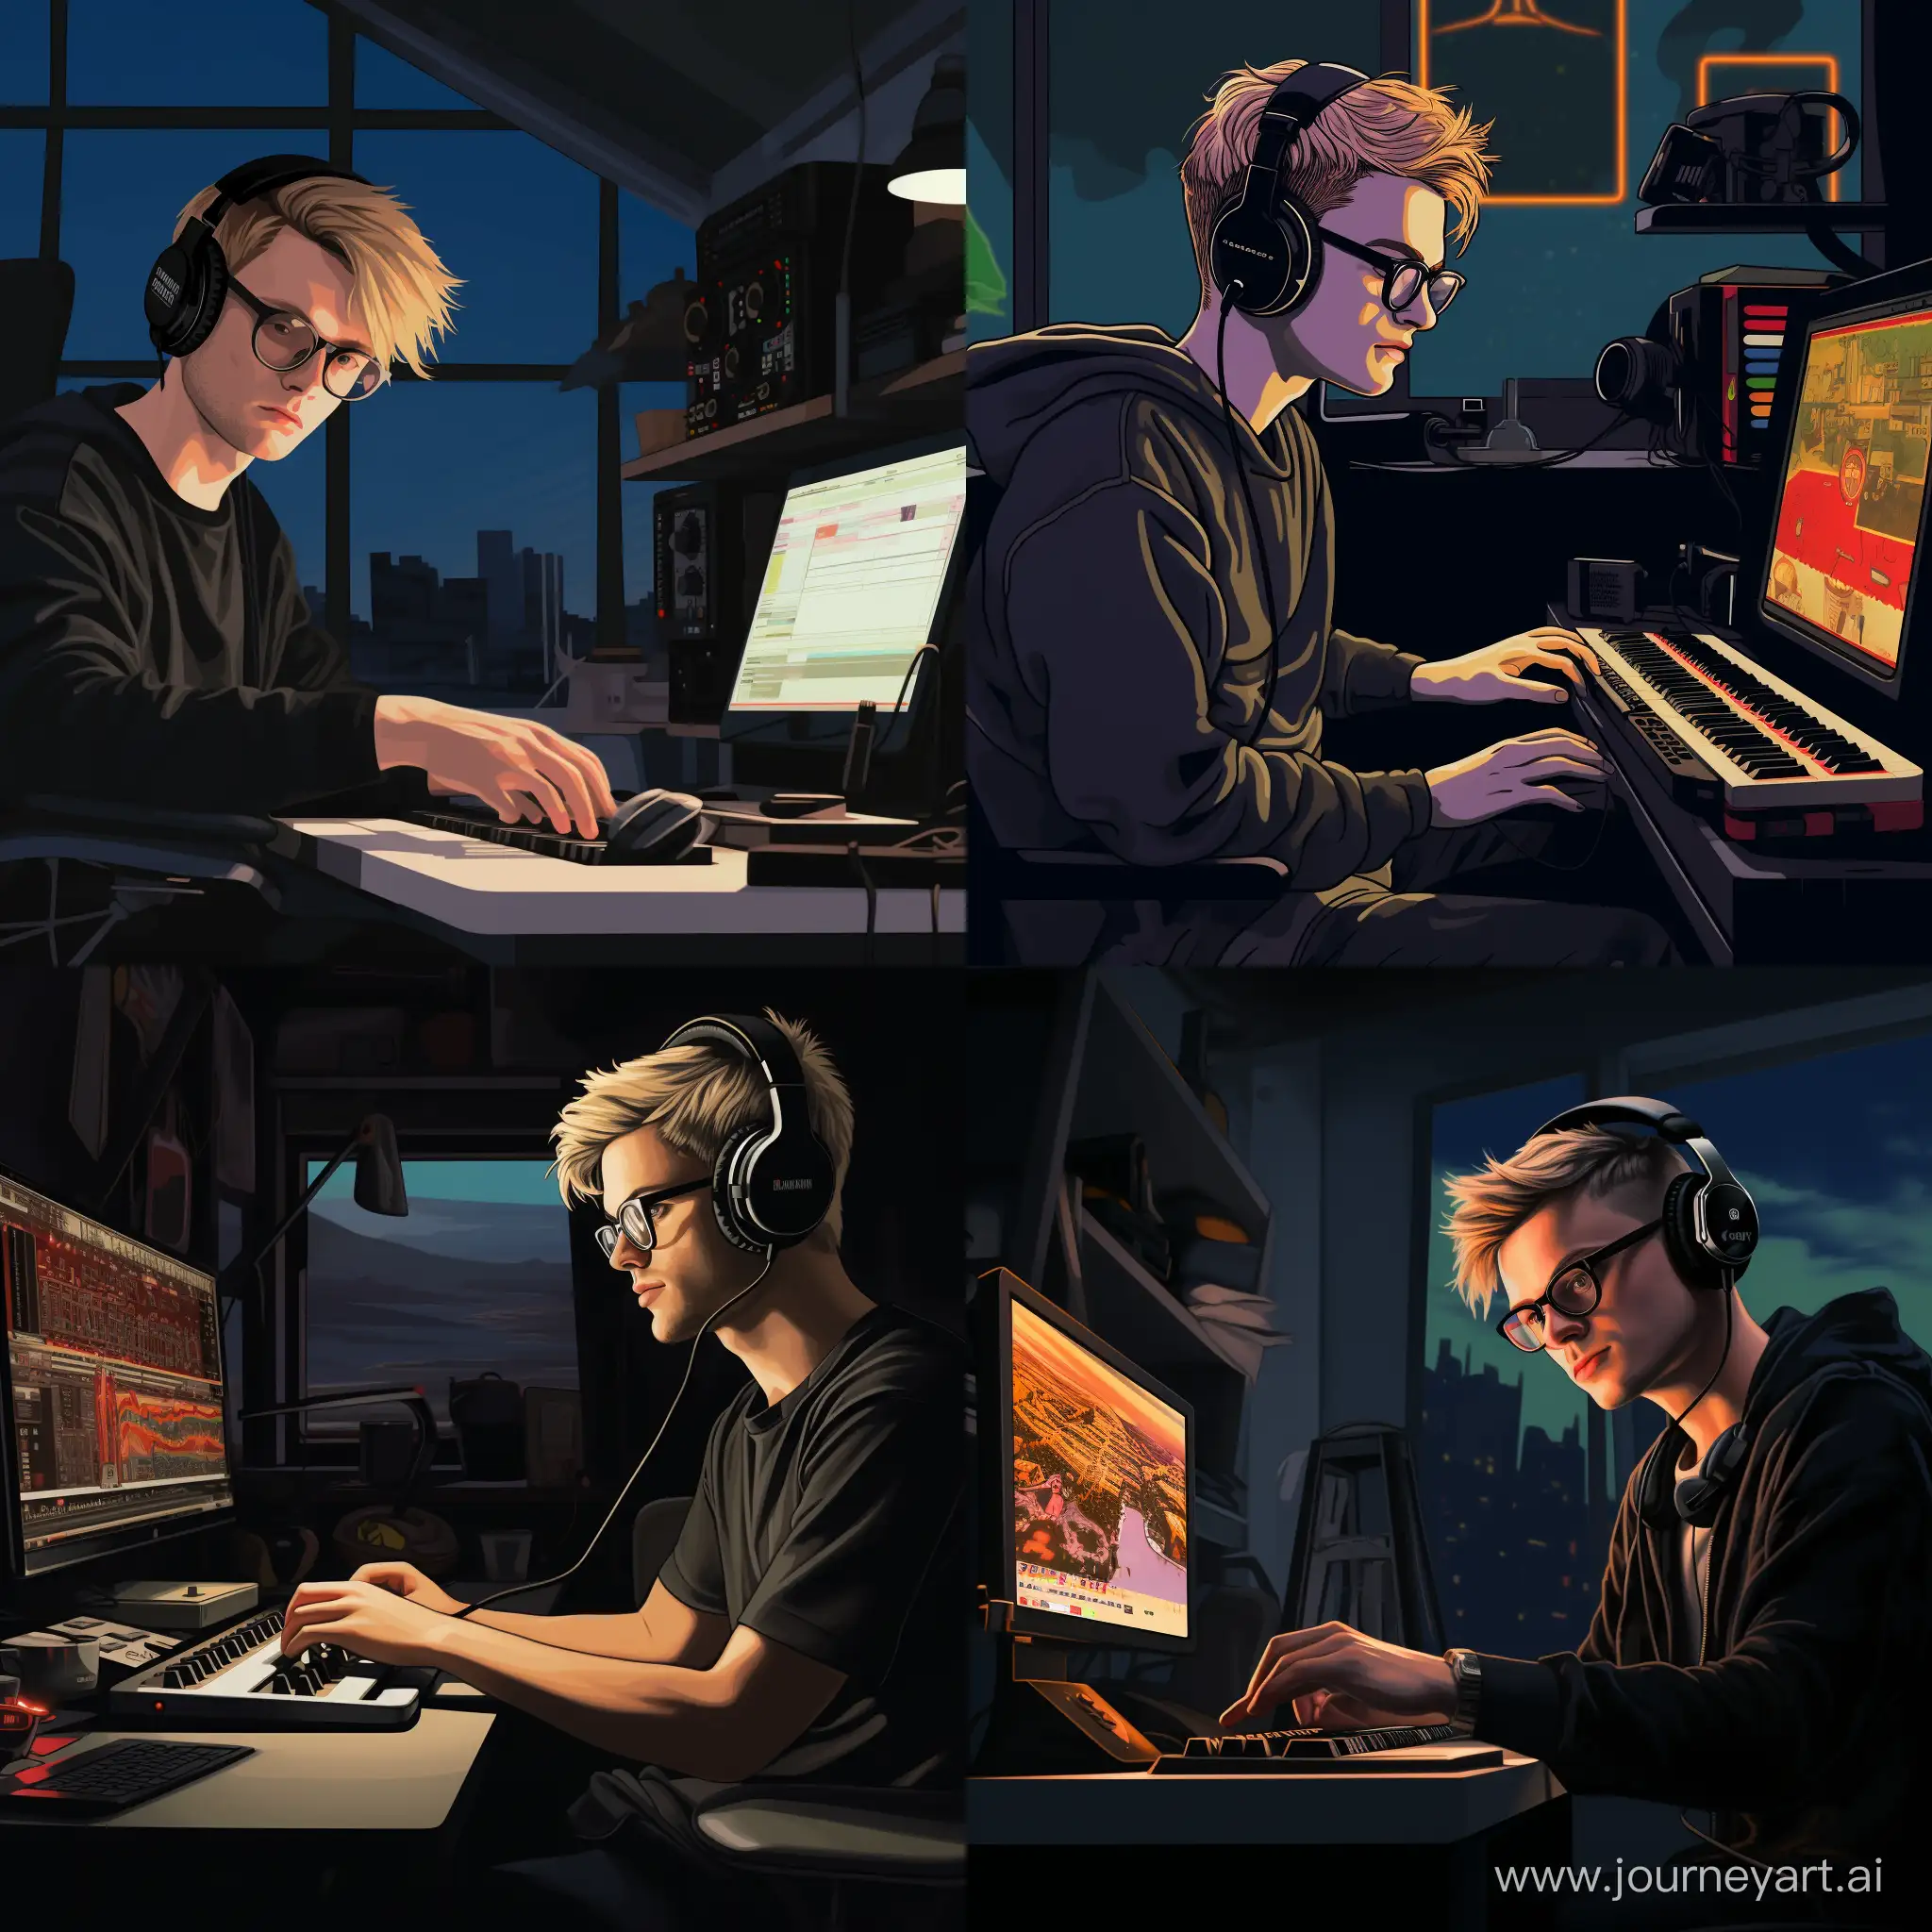 A hyper realistic image of a man in his mid 20s with short blonde hair, wearing black glasses, is sitting in his room alone, he has s small studio set up in his room and he is working on music, the room is dark and atmospheric, he is wearing headphones made out of burgers and ronald mcdonald is sitting next to him working on music. They both look sad.